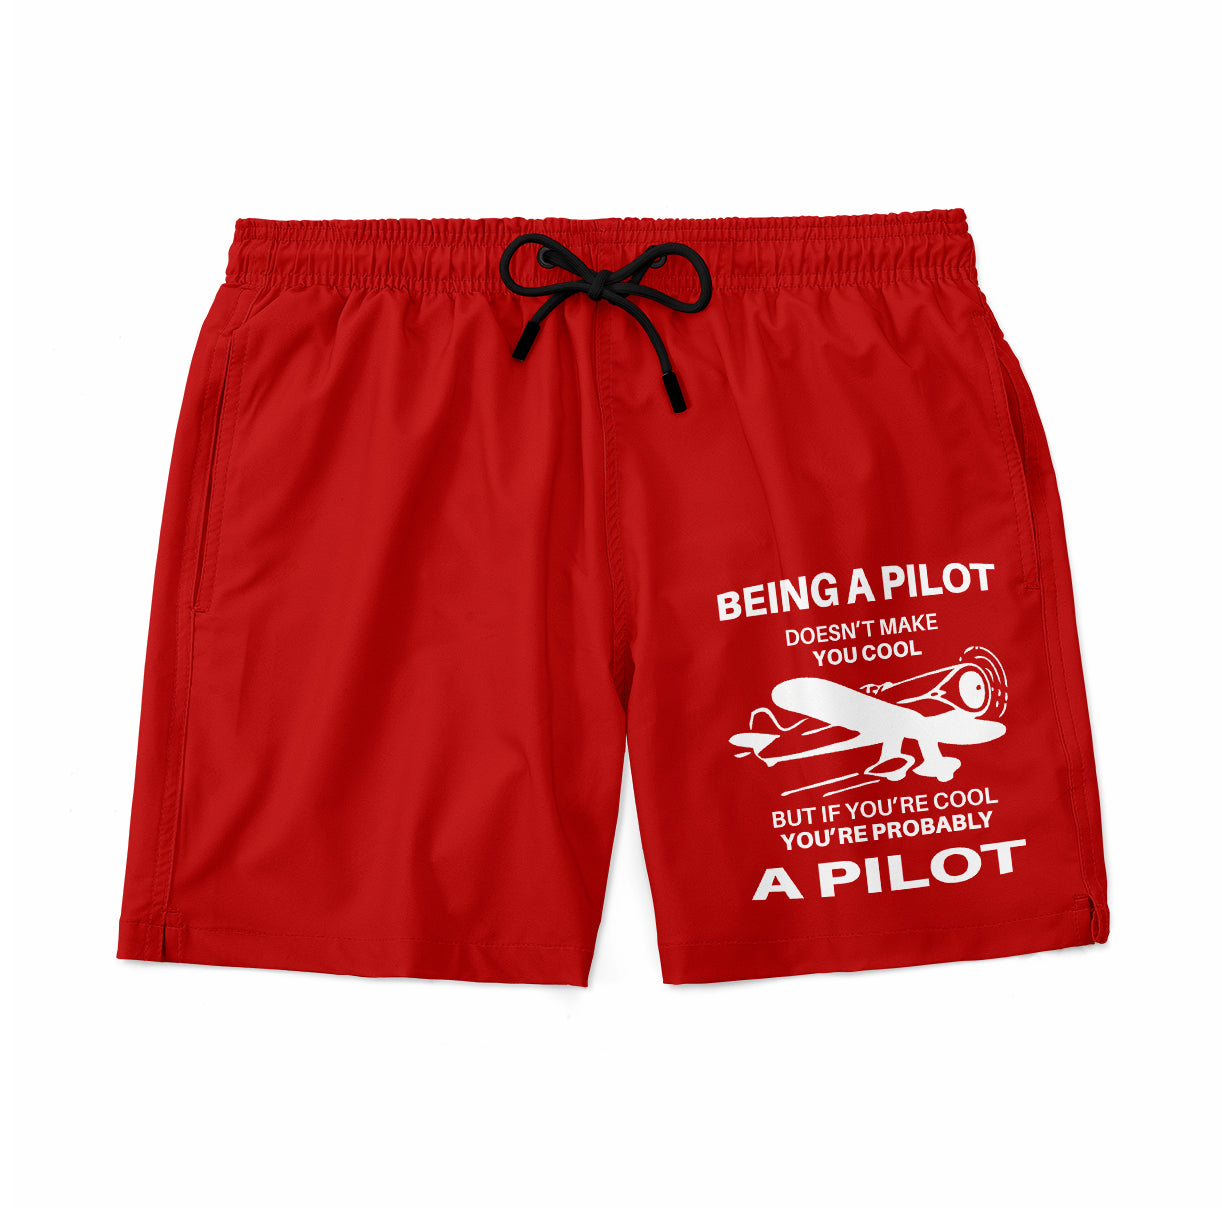 If You're Cool You're Probably a Pilot Designed Swim Trunks & Shorts